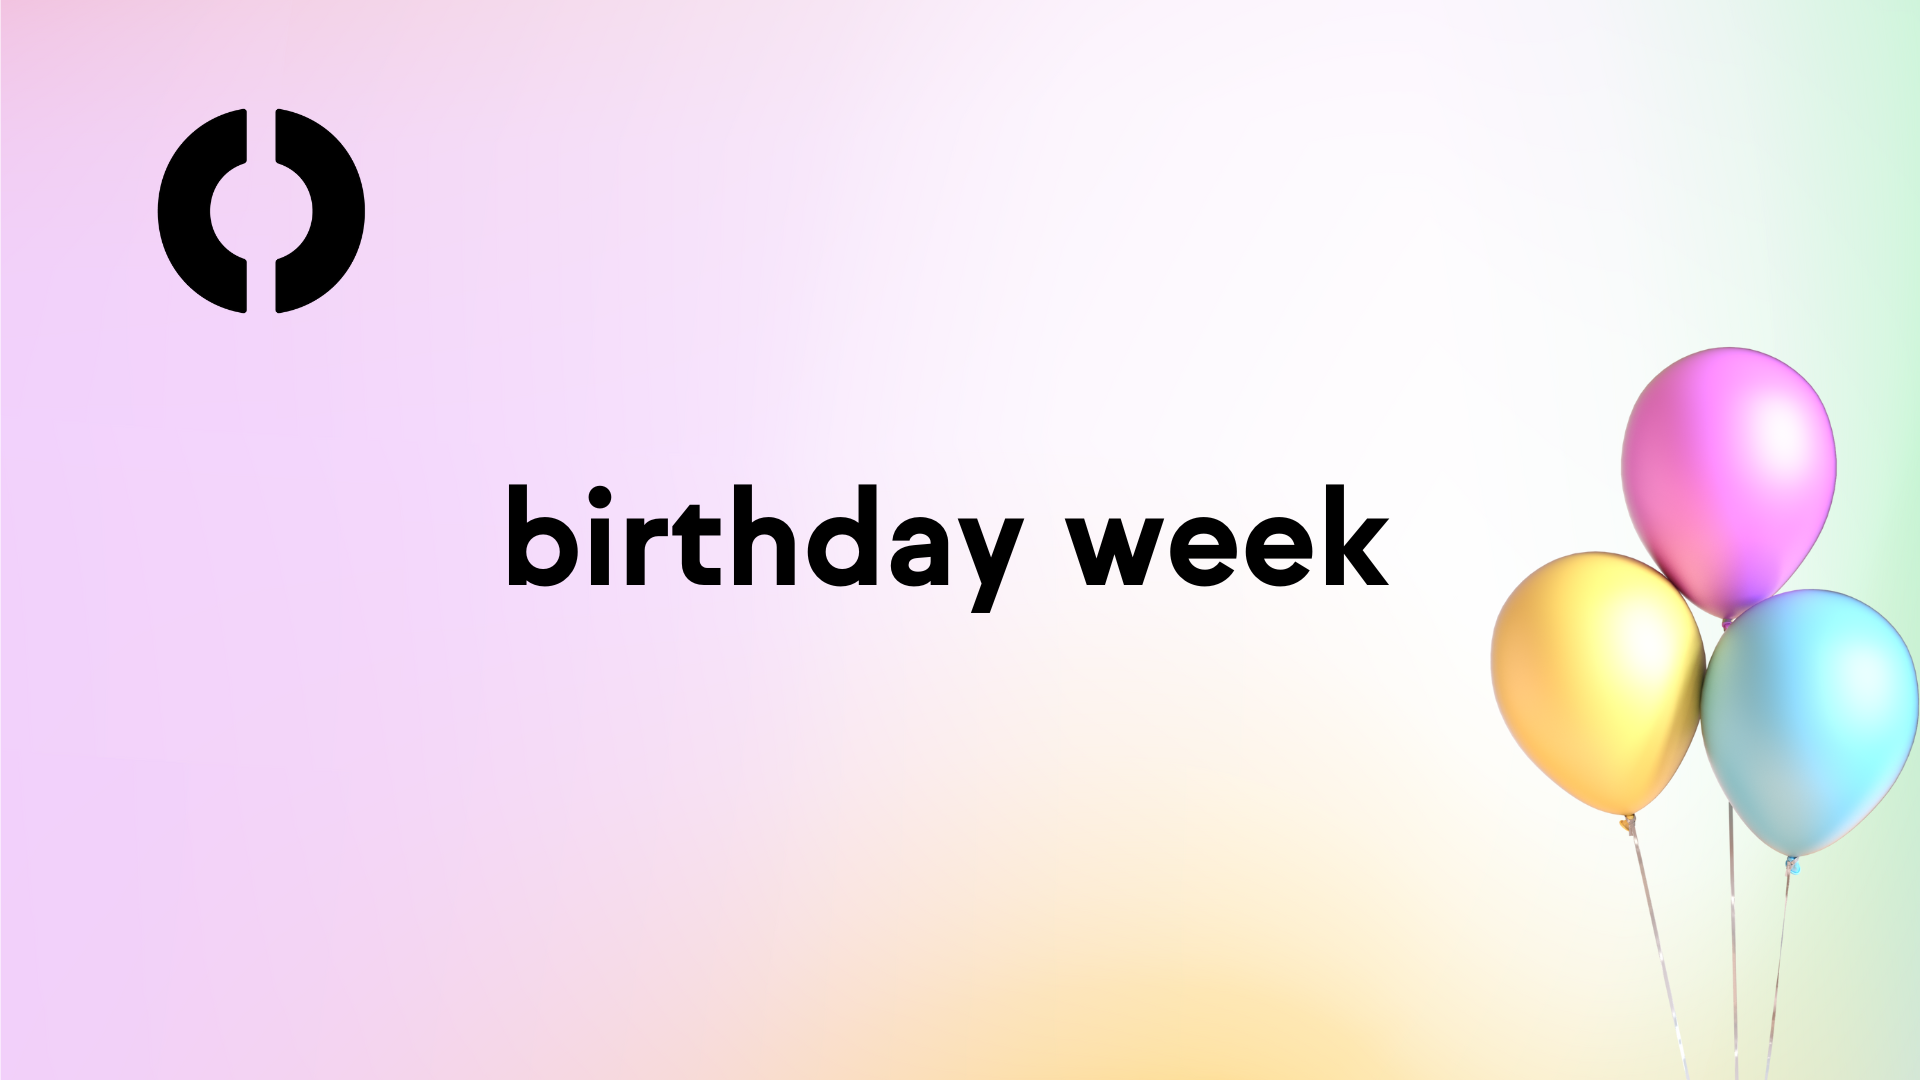 colorful gradient with pastel colors, the allcove logo on the top left corner, and three balloons colored pink, yellow, and turquoise to the right. Text that reads "birthday week" centered on the image.